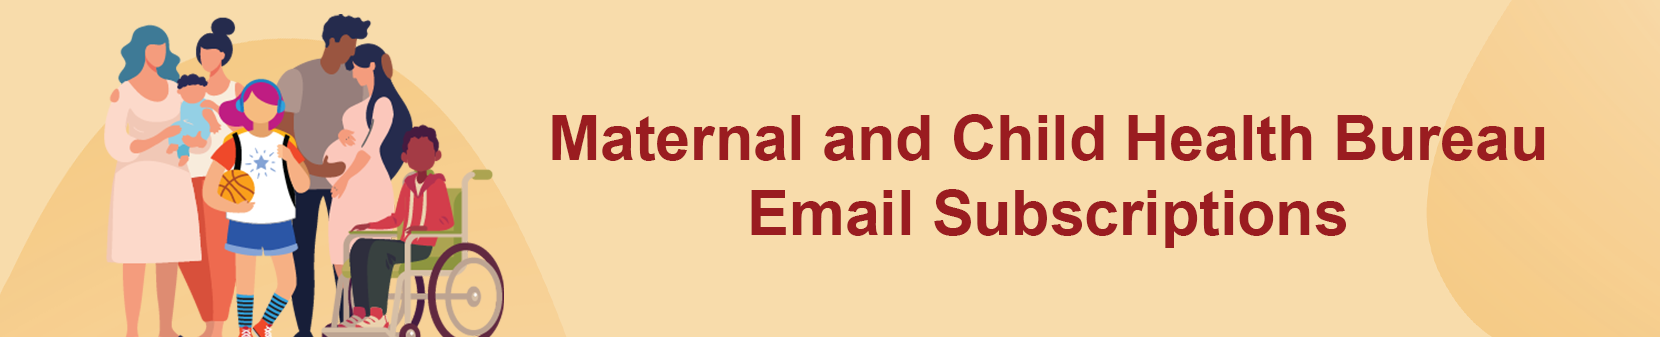 MCHB Email Subscriptions